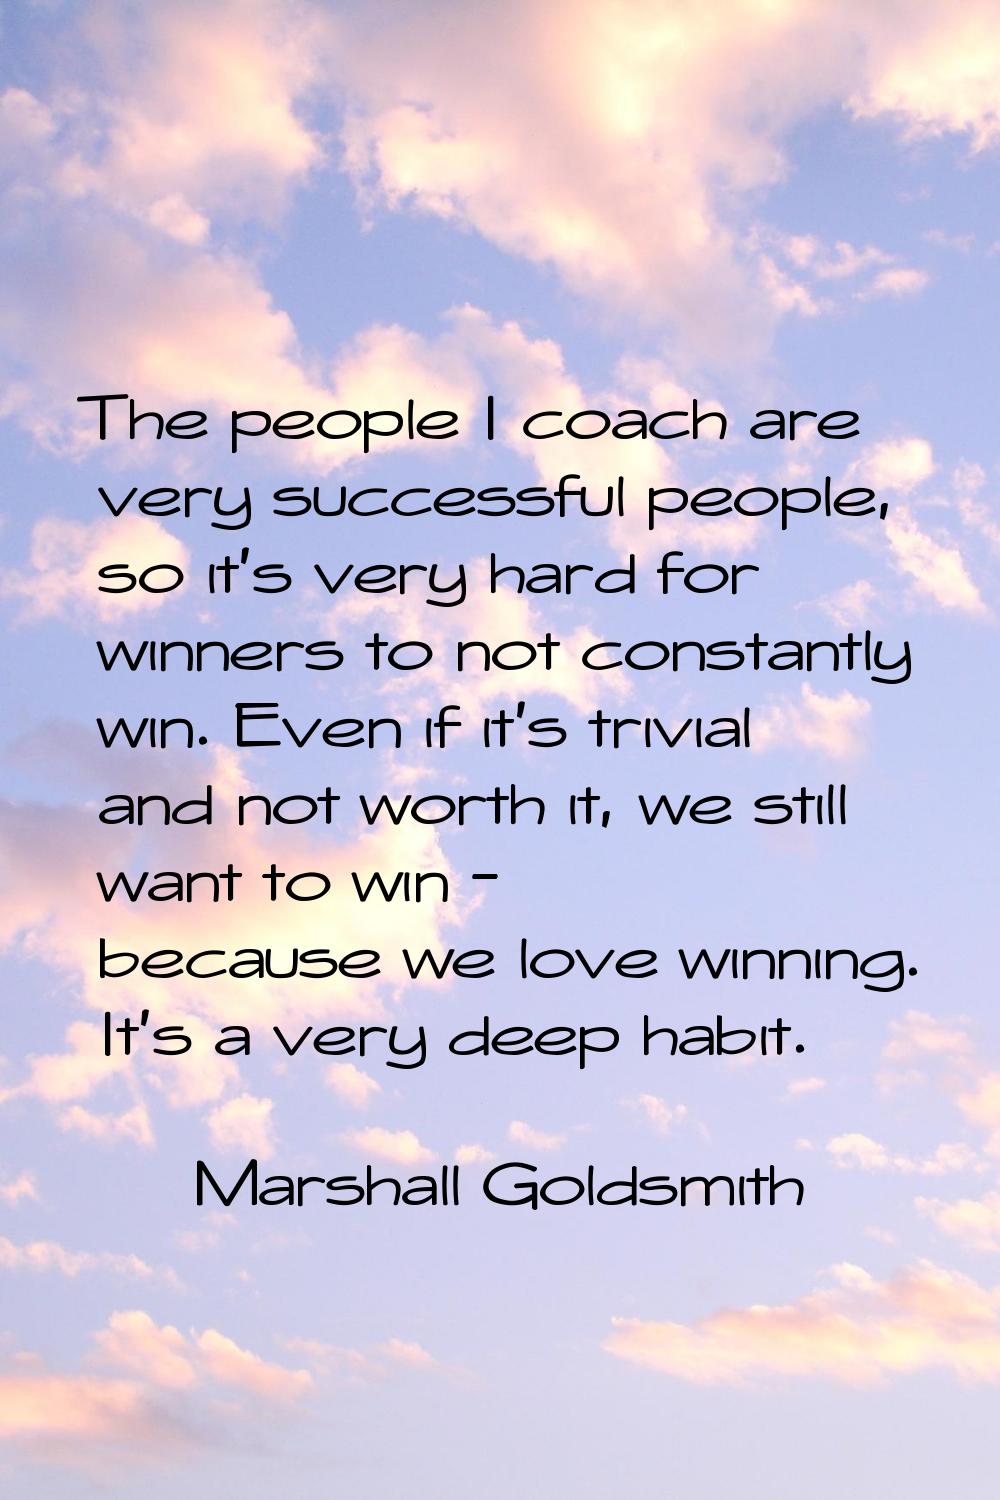 The people I coach are very successful people, so it's very hard for winners to not constantly win.